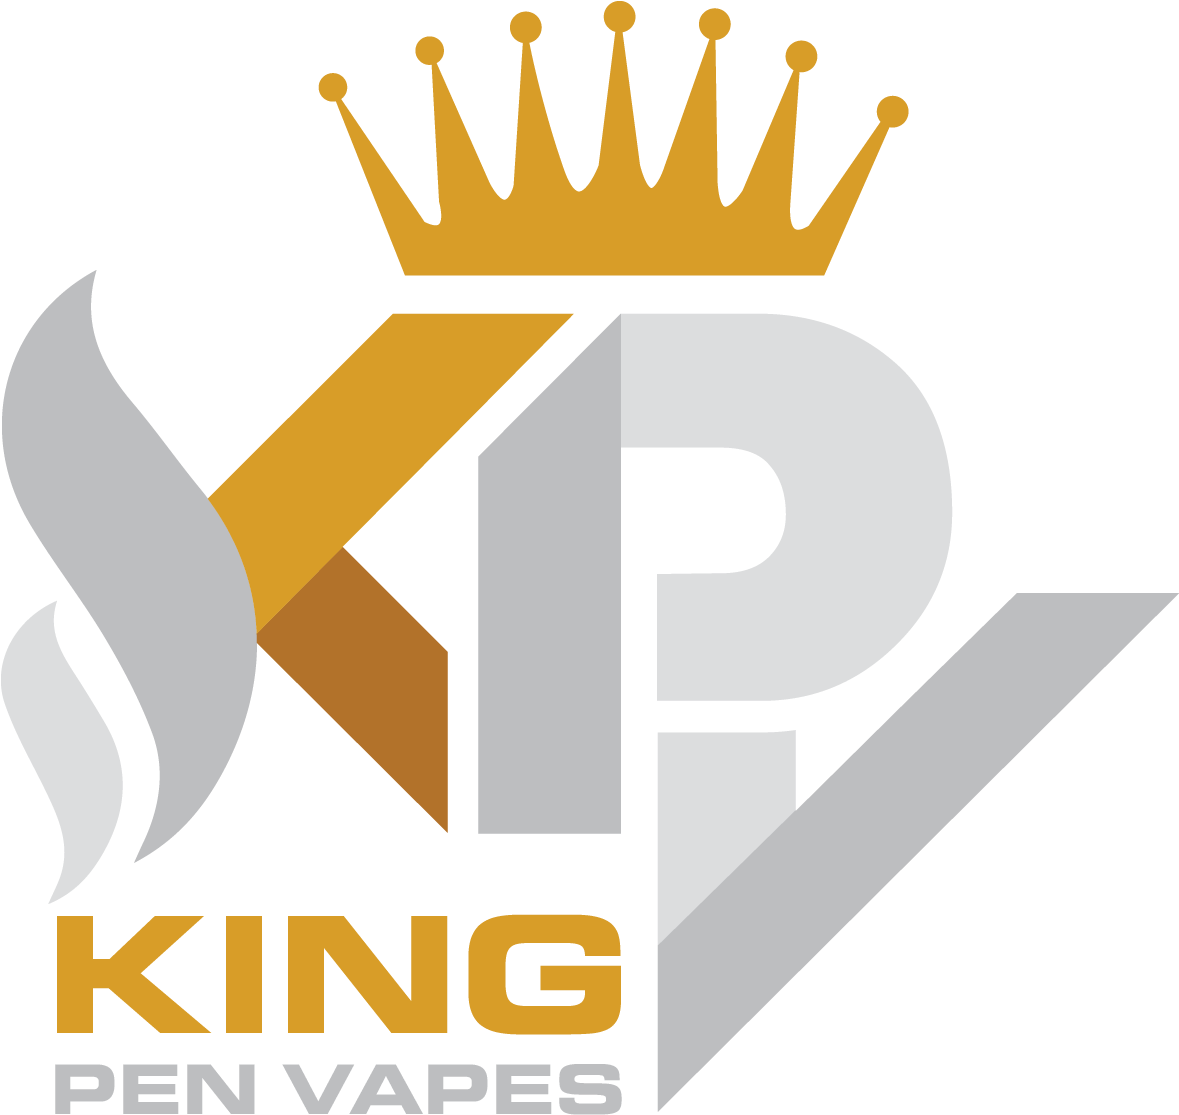 King Pen Vapes We Are Your Ultimate One Stop Shop For - Vaporizer (1178x1134)